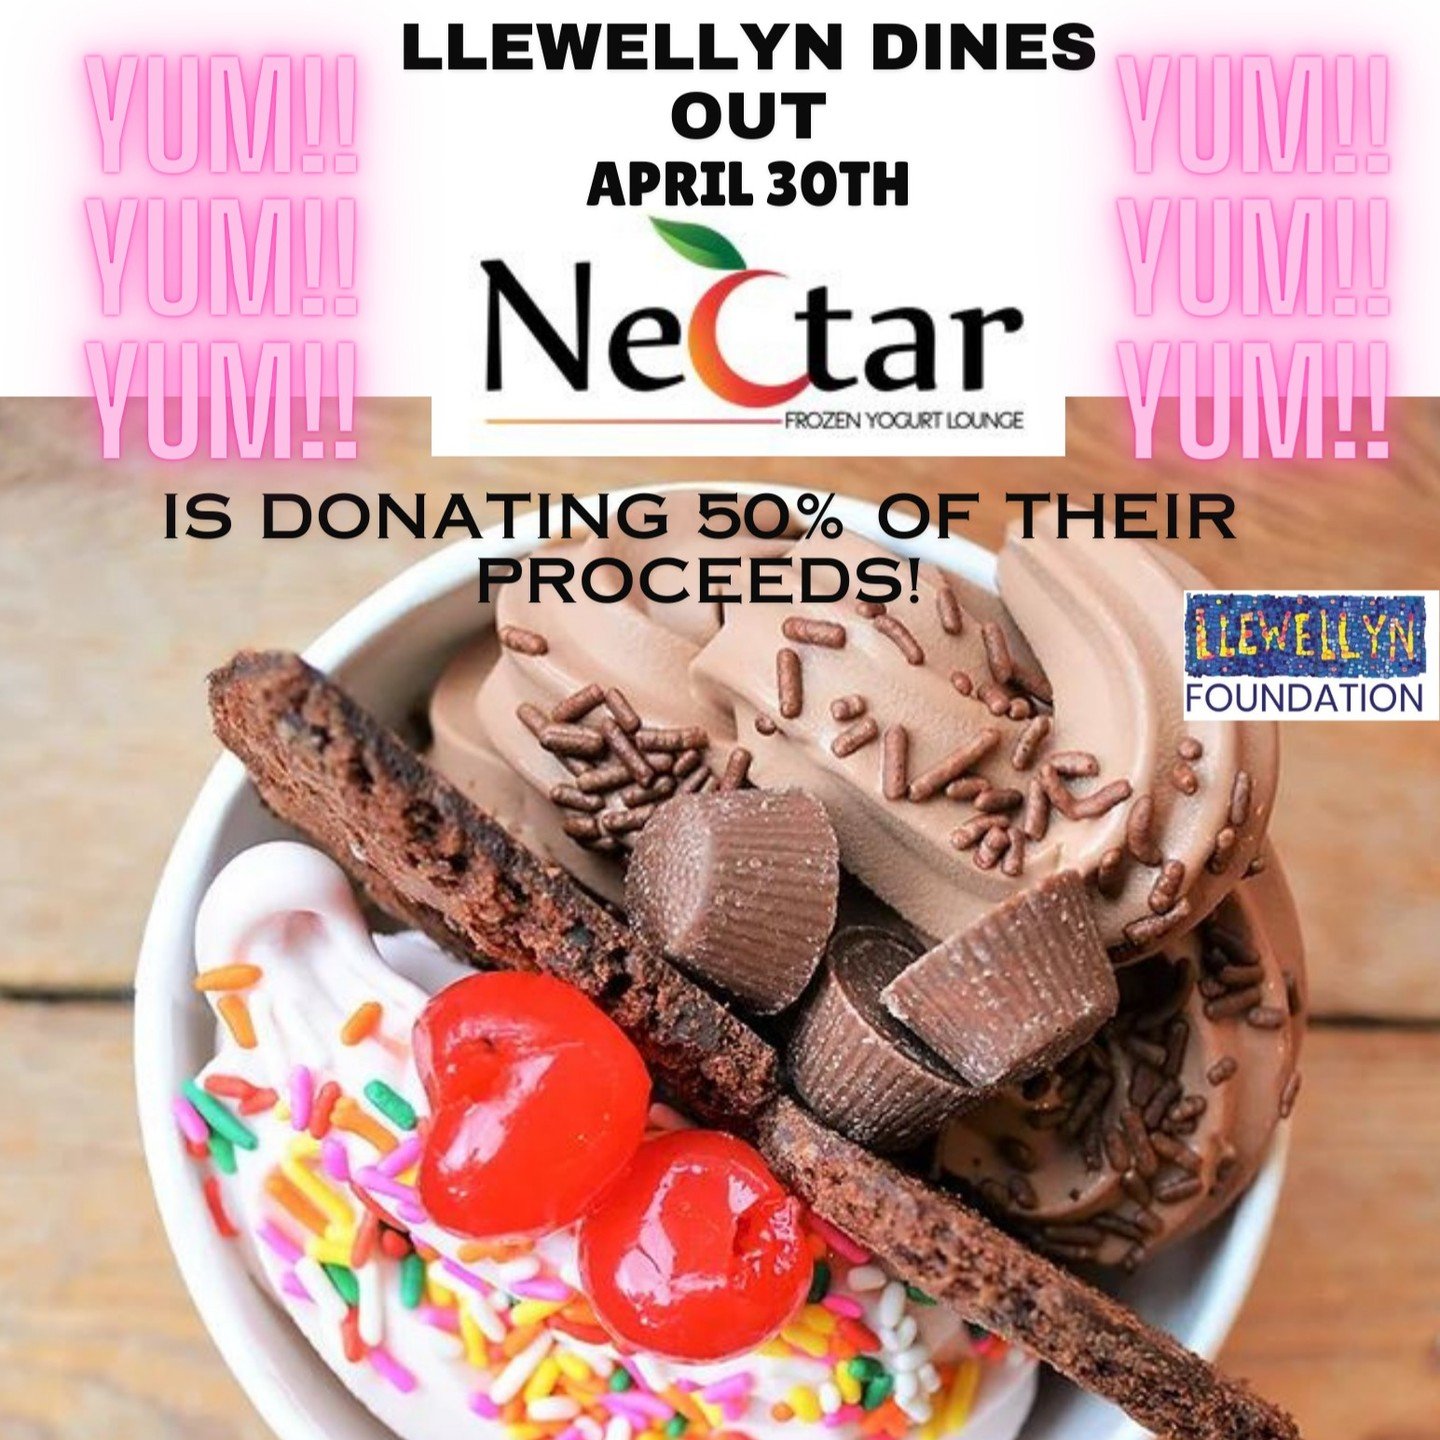 DINE OUT for an after school date and/or save your appetite for a special after dinner treat! @nectarfrozenyogurt is donating 50% of their proceeds to the Llewellyn Foundation April 30th.🎉🍨